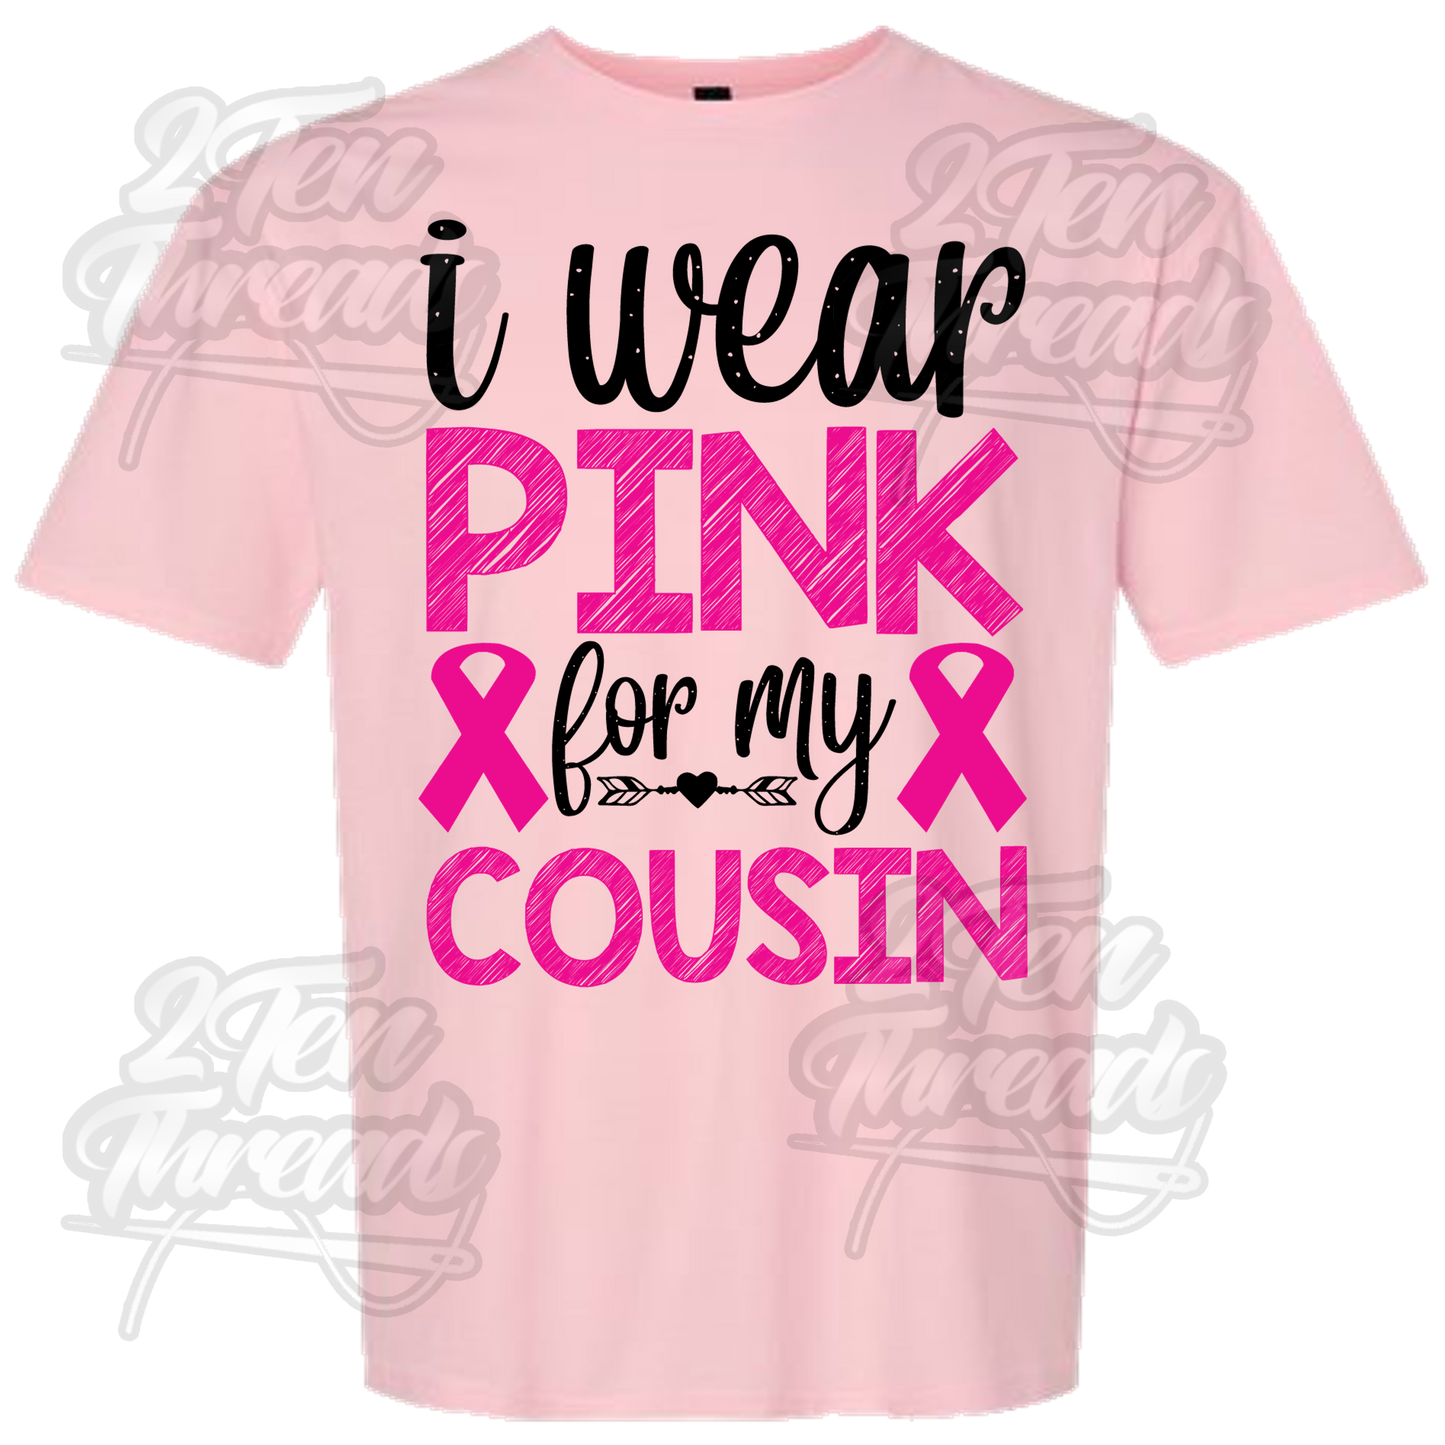 Pink for Cousin Shirt